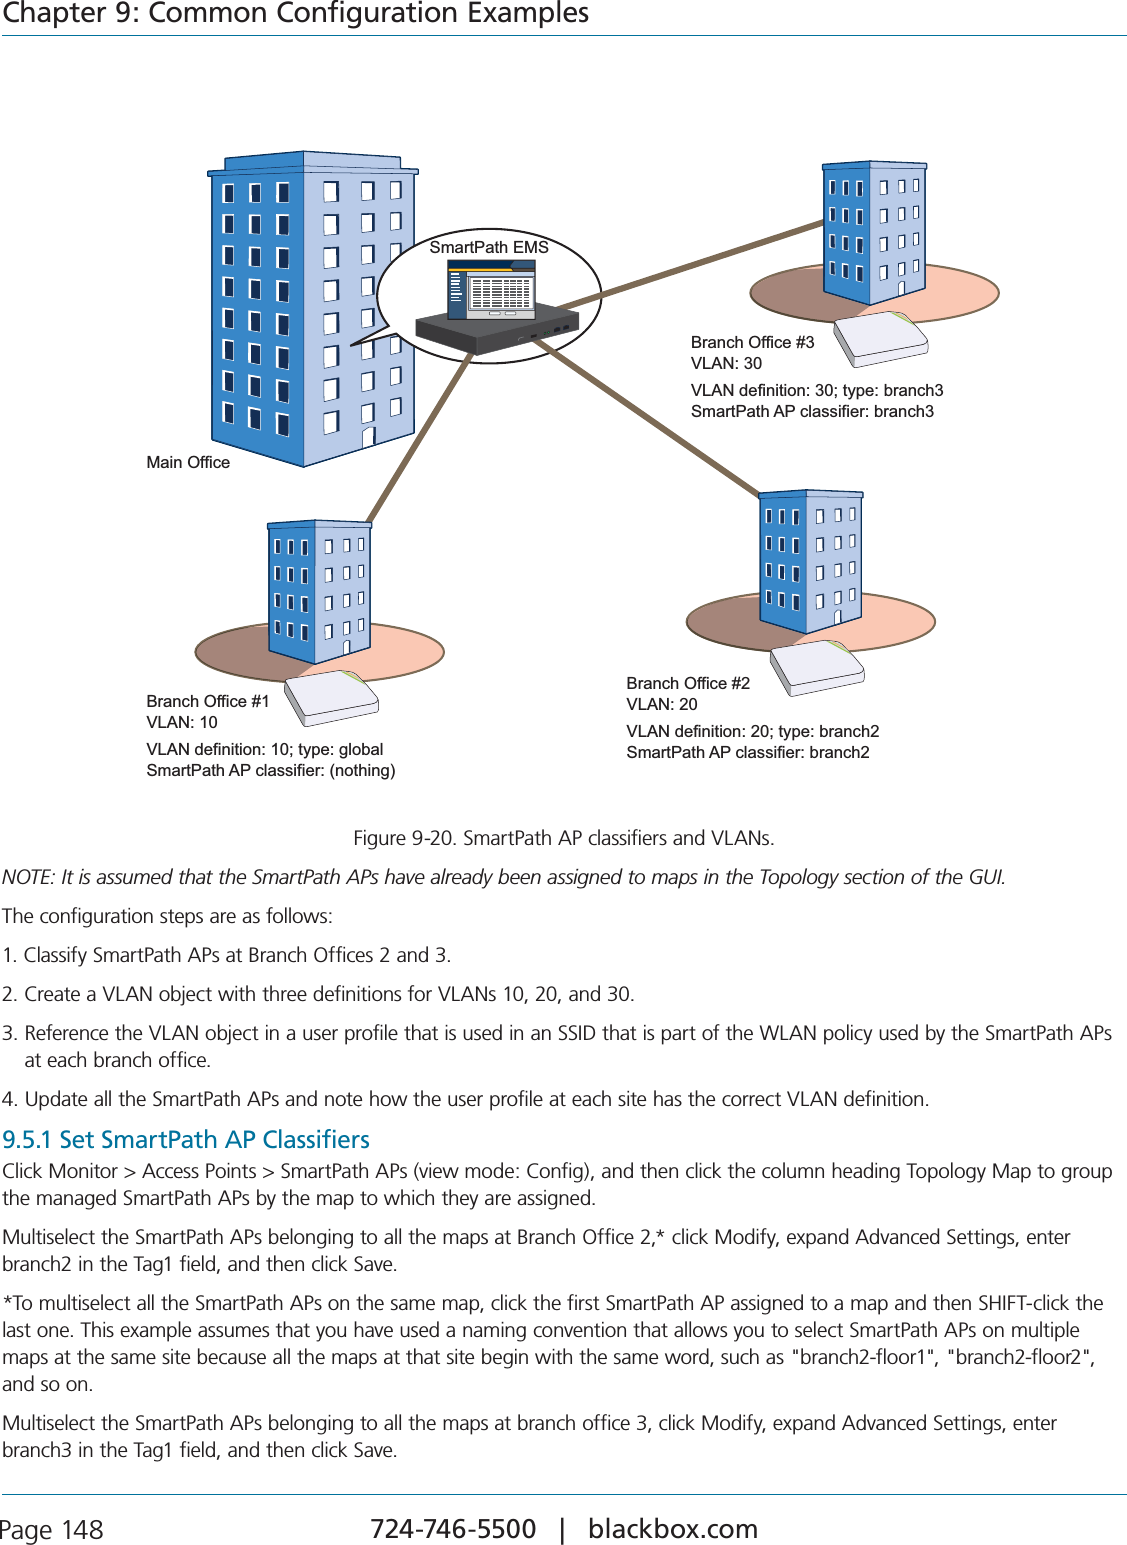 724-746-5500   |   blackbox.com Page 148Chapter 9: Common Configuration ExamplesBranch Office #1VLAN: 10VLAN definition: 10; type: globalSmartPath AP classifier: (nothing)Branch Office #3VLAN: 30VLAN definition: 30; type: branch3SmartPath AP classifier: branch3Branch Office #2VLAN: 20VLAN definition: 20; type: branch2 SmartPath AP classifier: branch2Main OfficeSmartPath EMS&amp;IGURE3MART0ATH!0CLASSIFIERSAND6,!.SNOTE: It is assumed that the SmartPath APs have already been assigned to maps in the Topology section of the GUI.The configuration steps are as follows:1. Classify SmartPath APs at Branch Offices 2 and 3.2. Create a VLAN object with three definitions for VLANs 10, 20, and 30.3.  Reference the VLAN object in a user profile that is used in an SSID that is part of the WLAN policy used by the SmartPath APs at each branch office.4. Update all the SmartPath APs and note how the user profile at each site has the correct VLAN definition.9.5.1 Set SmartPath AP ClassifiersClick Monitor &gt; Access Points &gt; SmartPath APs (view mode: Config), and then click the column heading Topology Map to group the managed SmartPath APs by the map to which they are assigned.Multiselect the SmartPath APs belonging to all the maps at Branch Office 2,* click Modify, expand Advanced Settings, enter branch2 in the Tag1 field, and then click Save.*To multiselect all the SmartPath APs on the same map, click the first SmartPath AP assigned to a map and then SHIFT-click the last one. This example assumes that you have used a naming convention that allows you to select SmartPath APs on multiple maps at the same site because all the maps at that site begin with the same word, such as &quot;branch2-floor1&quot;, &quot;branch2-floor2&quot;, and so on.Multiselect the SmartPath APs belonging to all the maps at branch office 3, click Modify, expand Advanced Settings, enter branch3 in the Tag1 field, and then click Save.